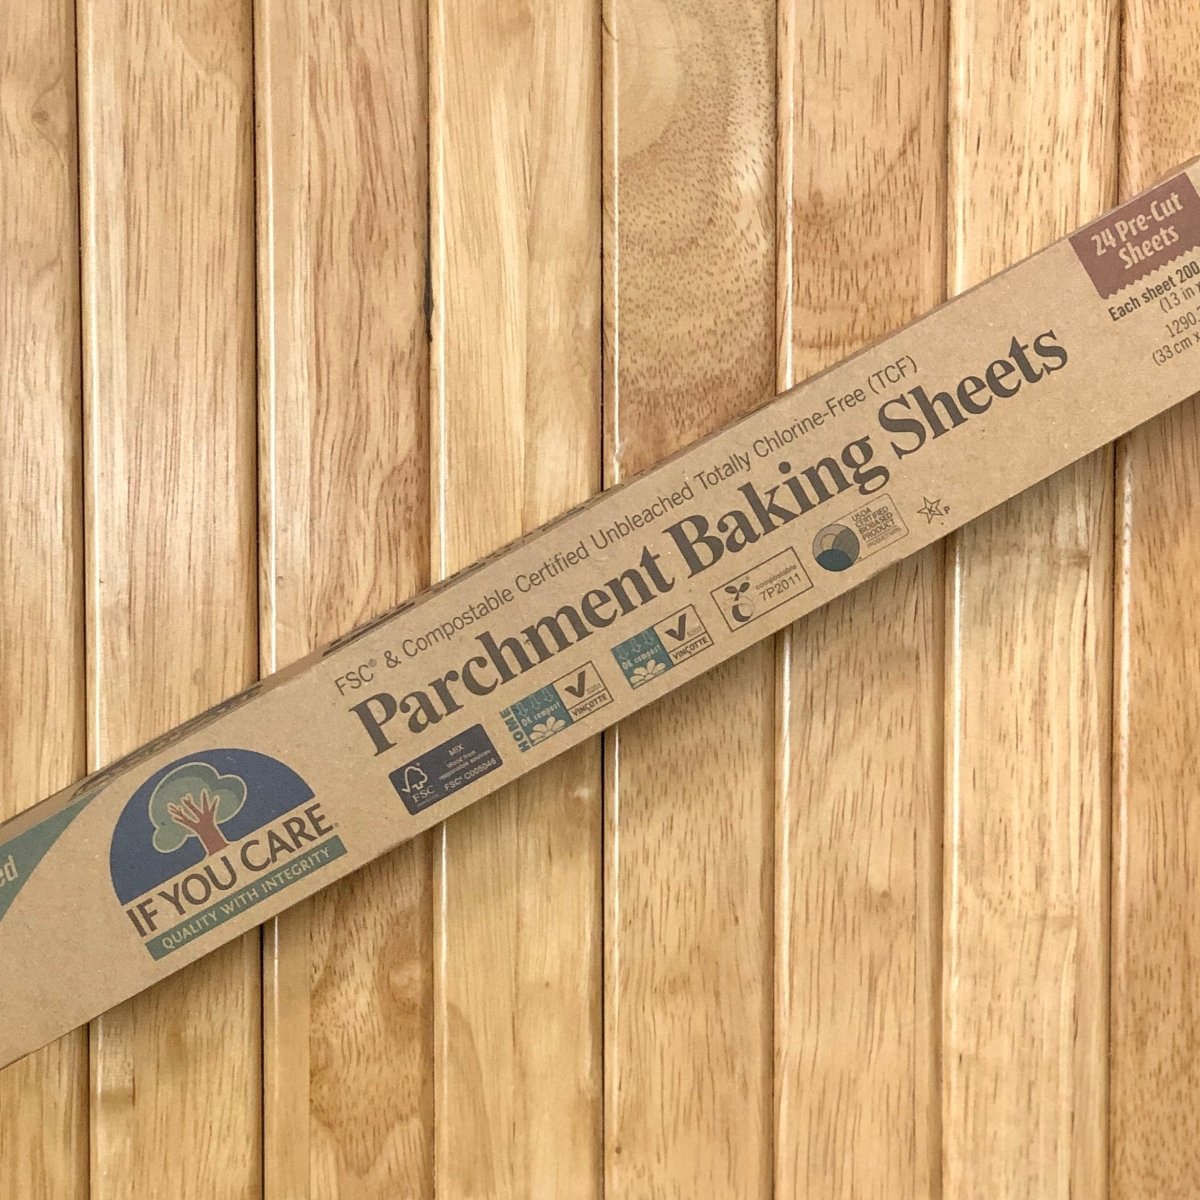 A Box of Chlorine-Free Parchment Baking Sheets from If You Care